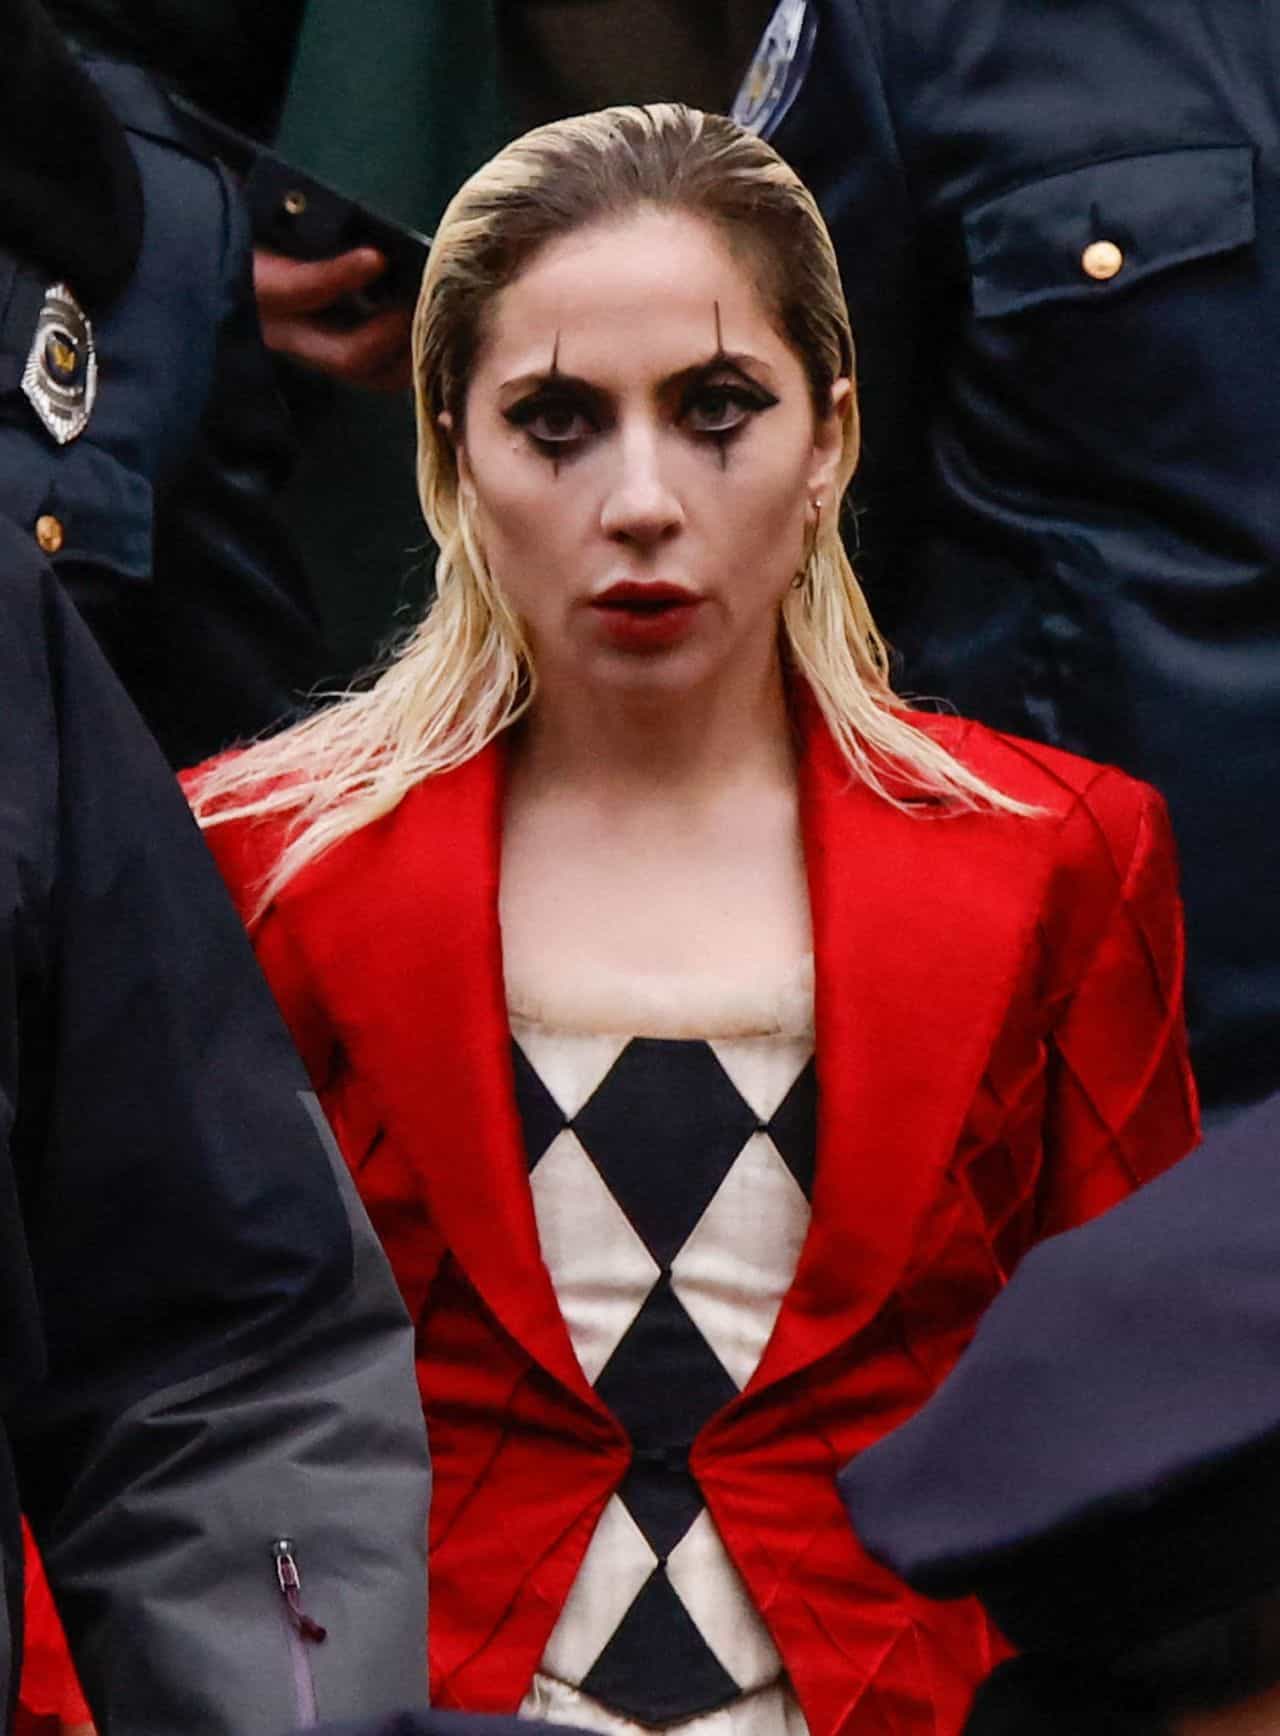 Lady Gaga Appeared on the Set of "The Joker 2" at City Hall in NY